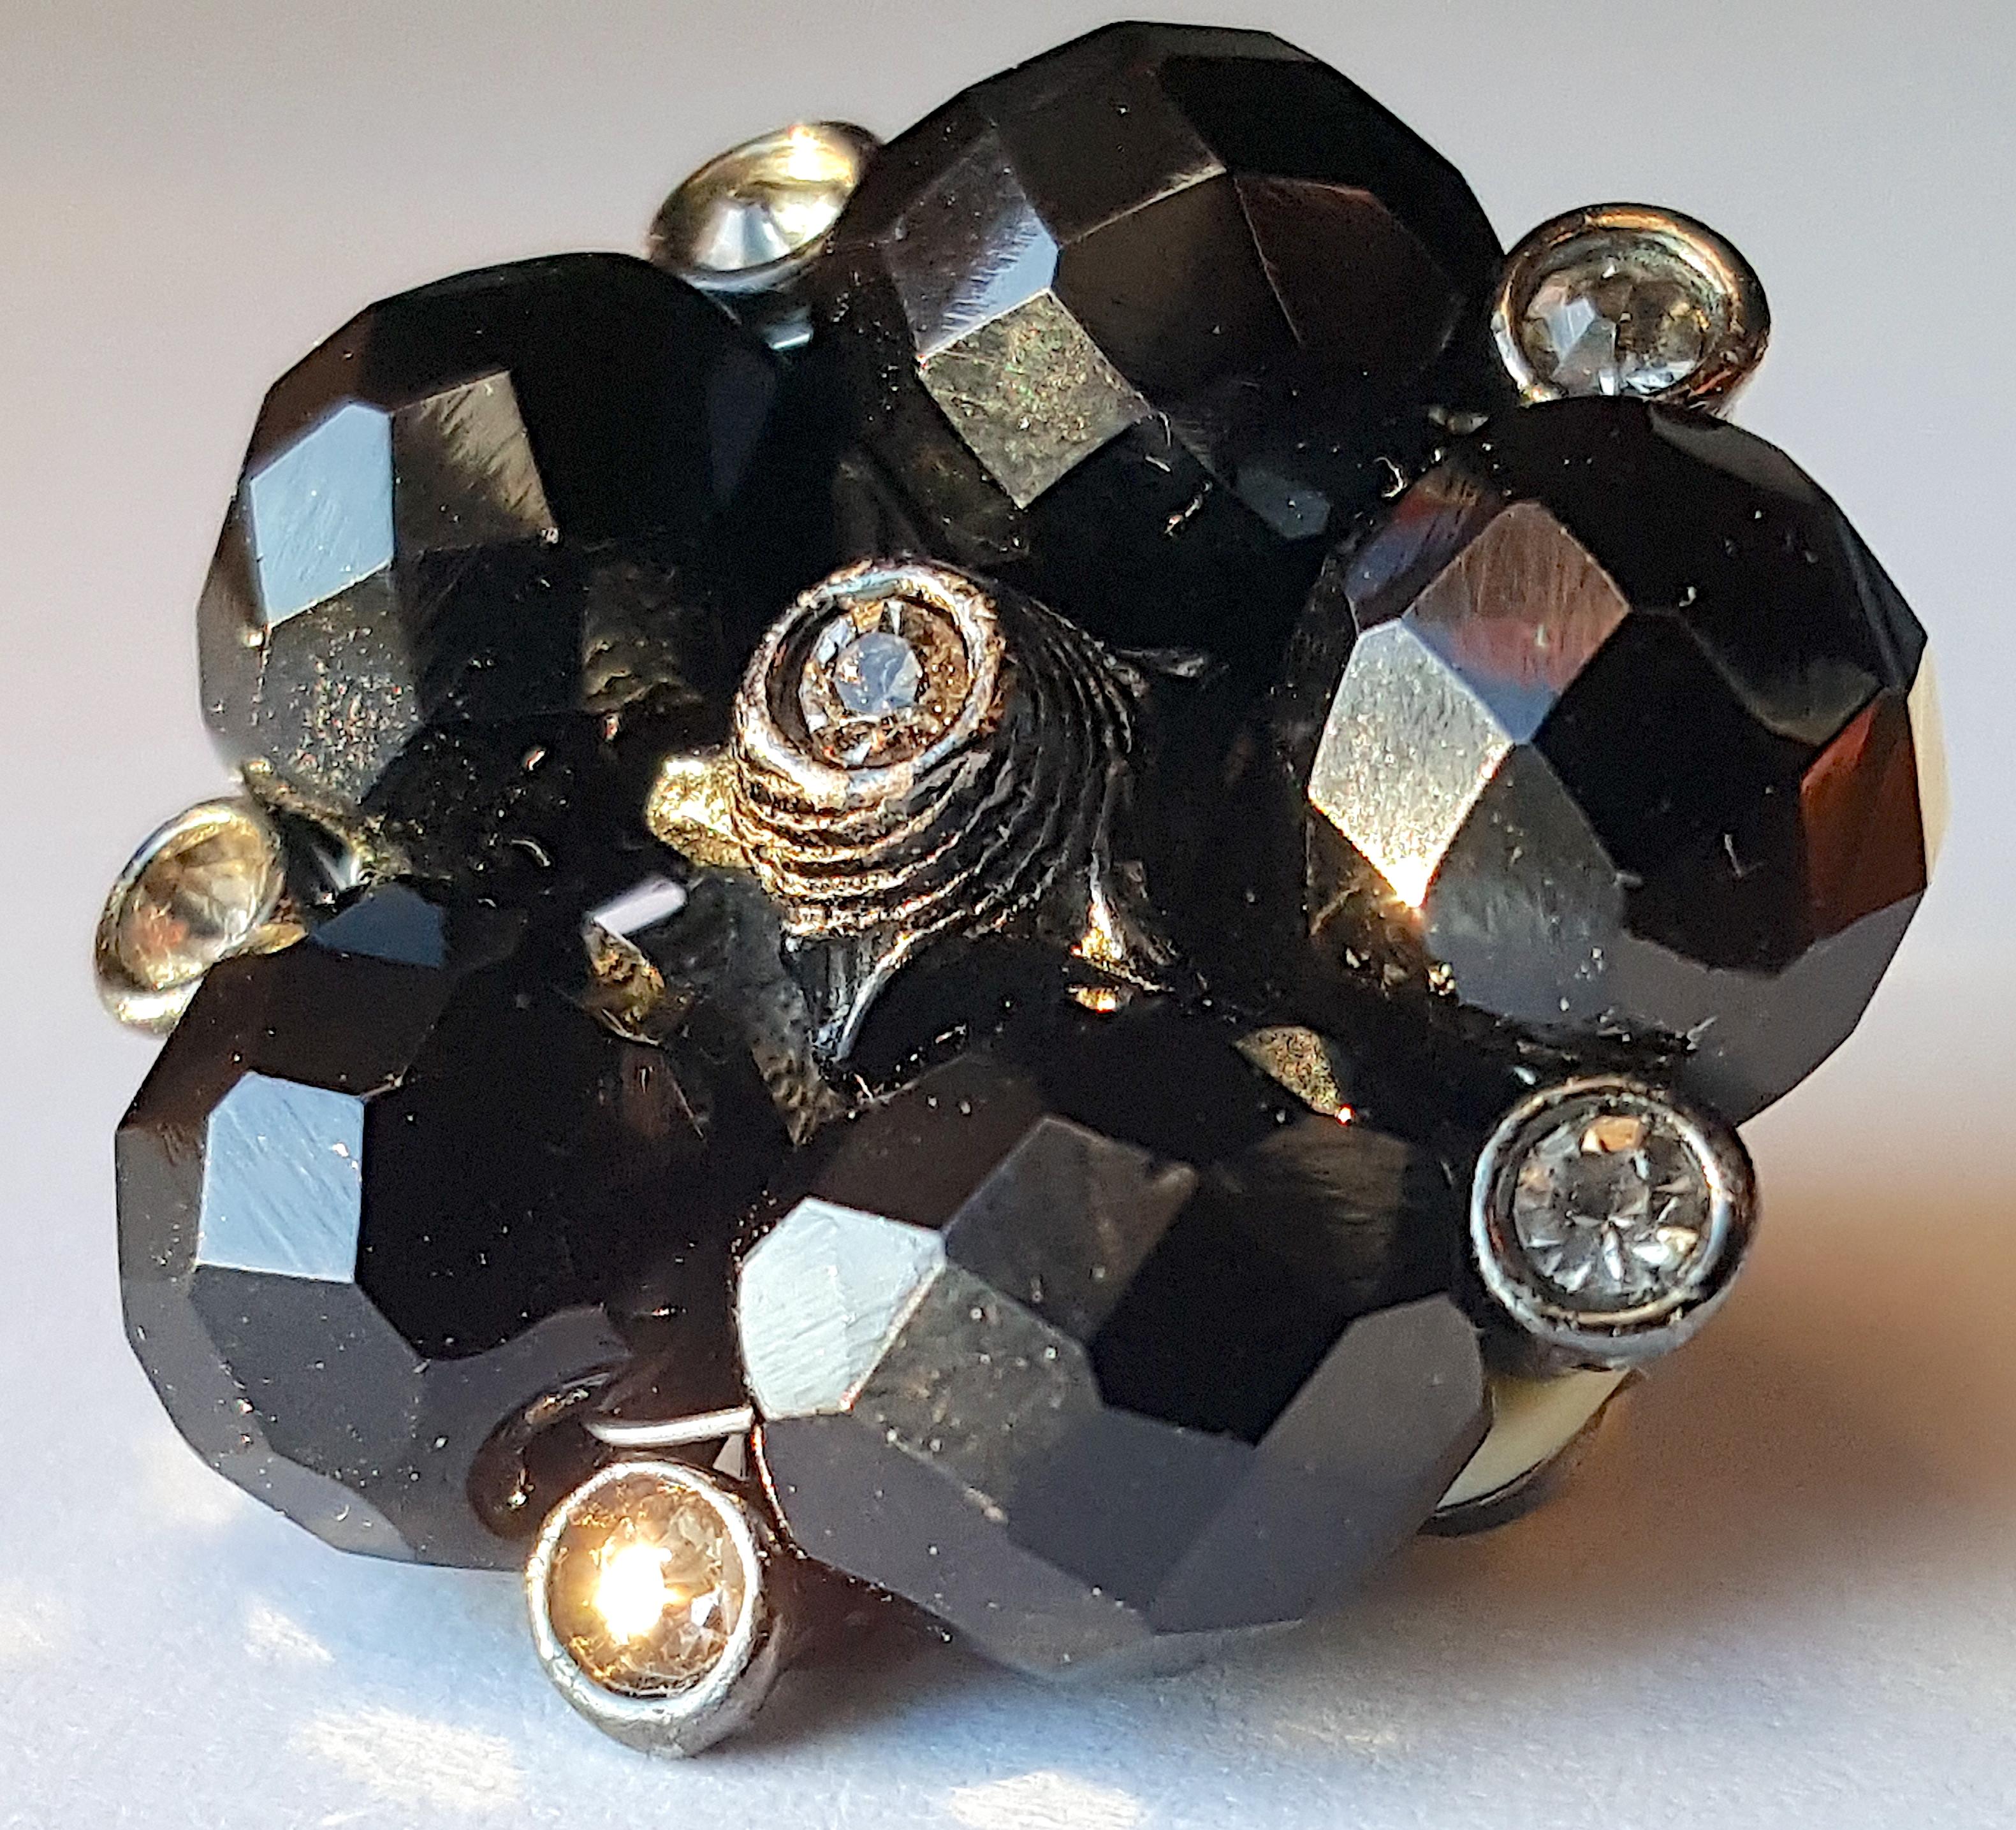 Featuring five sparkly black opaque spinels with diamond-shaped facets and splintery vitreous surfaces, along with bezel-set champagne diamonds with yellow or peach reflections in sunlight, these unsigned mid-century Buccellati-style